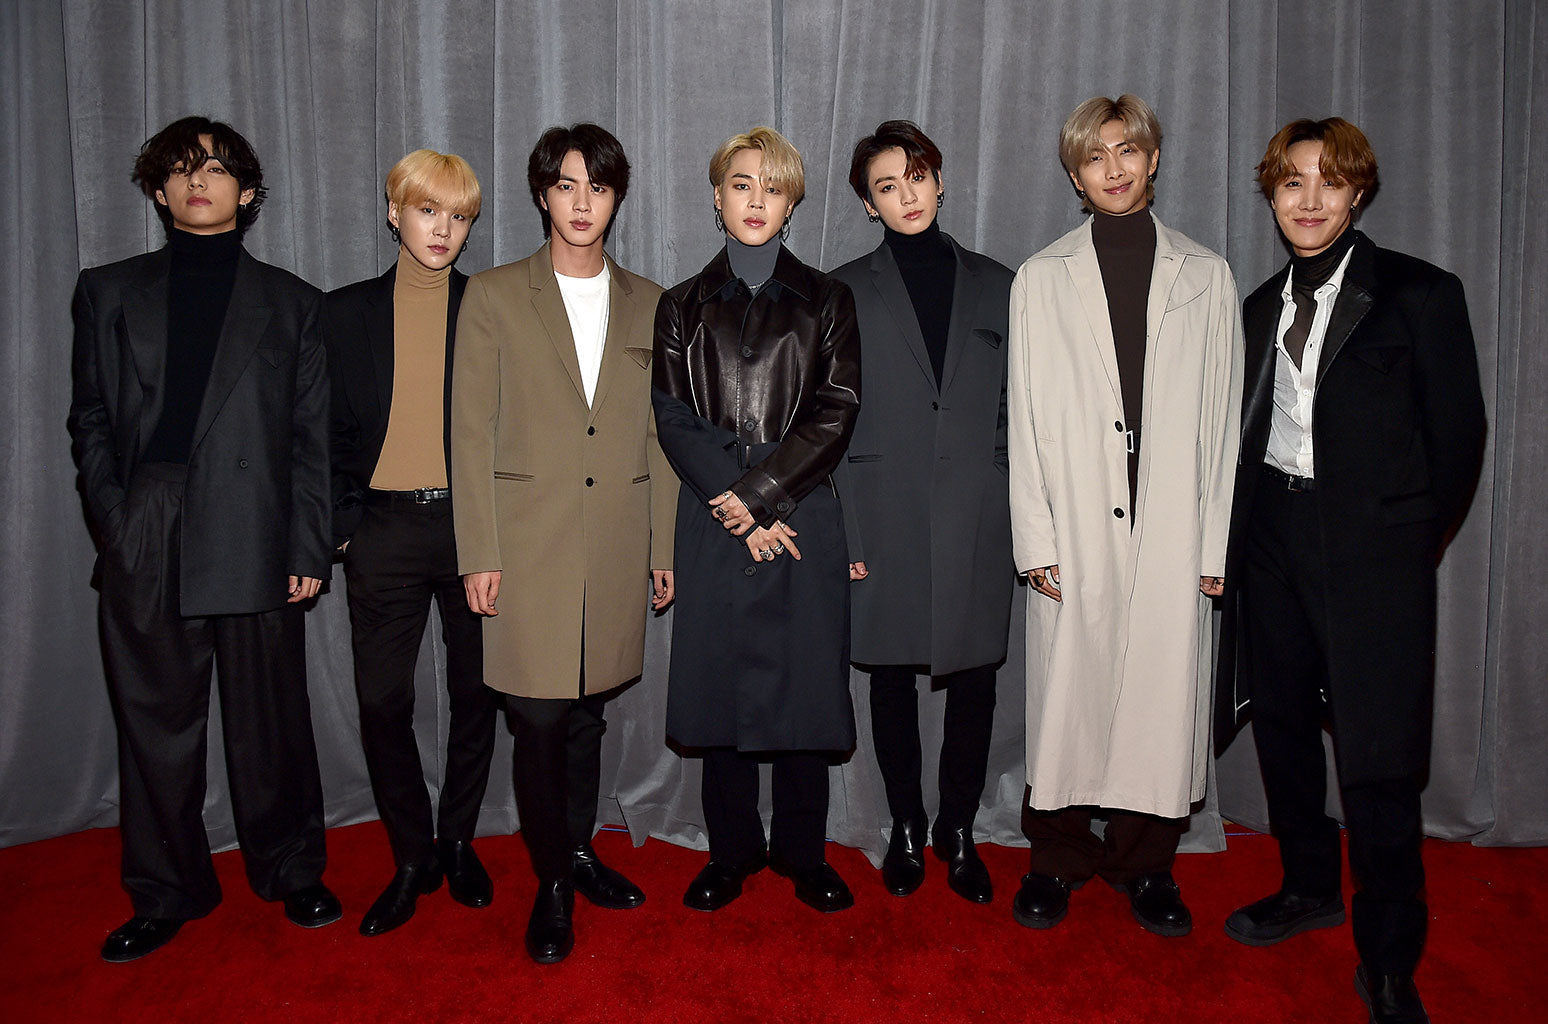 BTS Lights Up The Red Carpet At The 2019 Grammy Awards